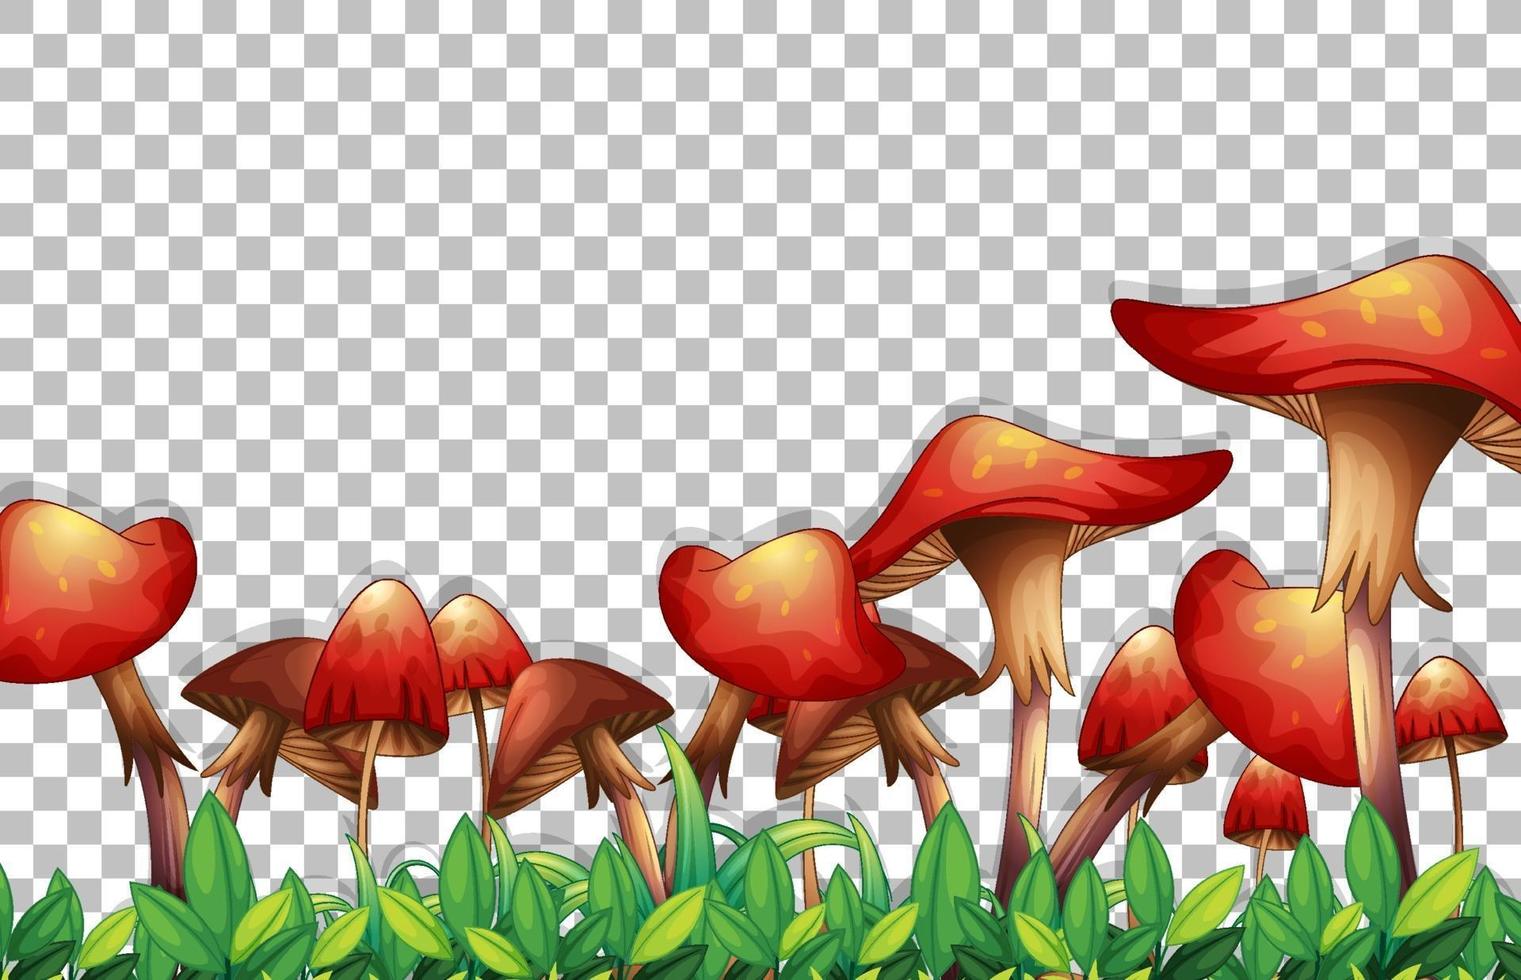 Mushrooms and leaves isolated vector